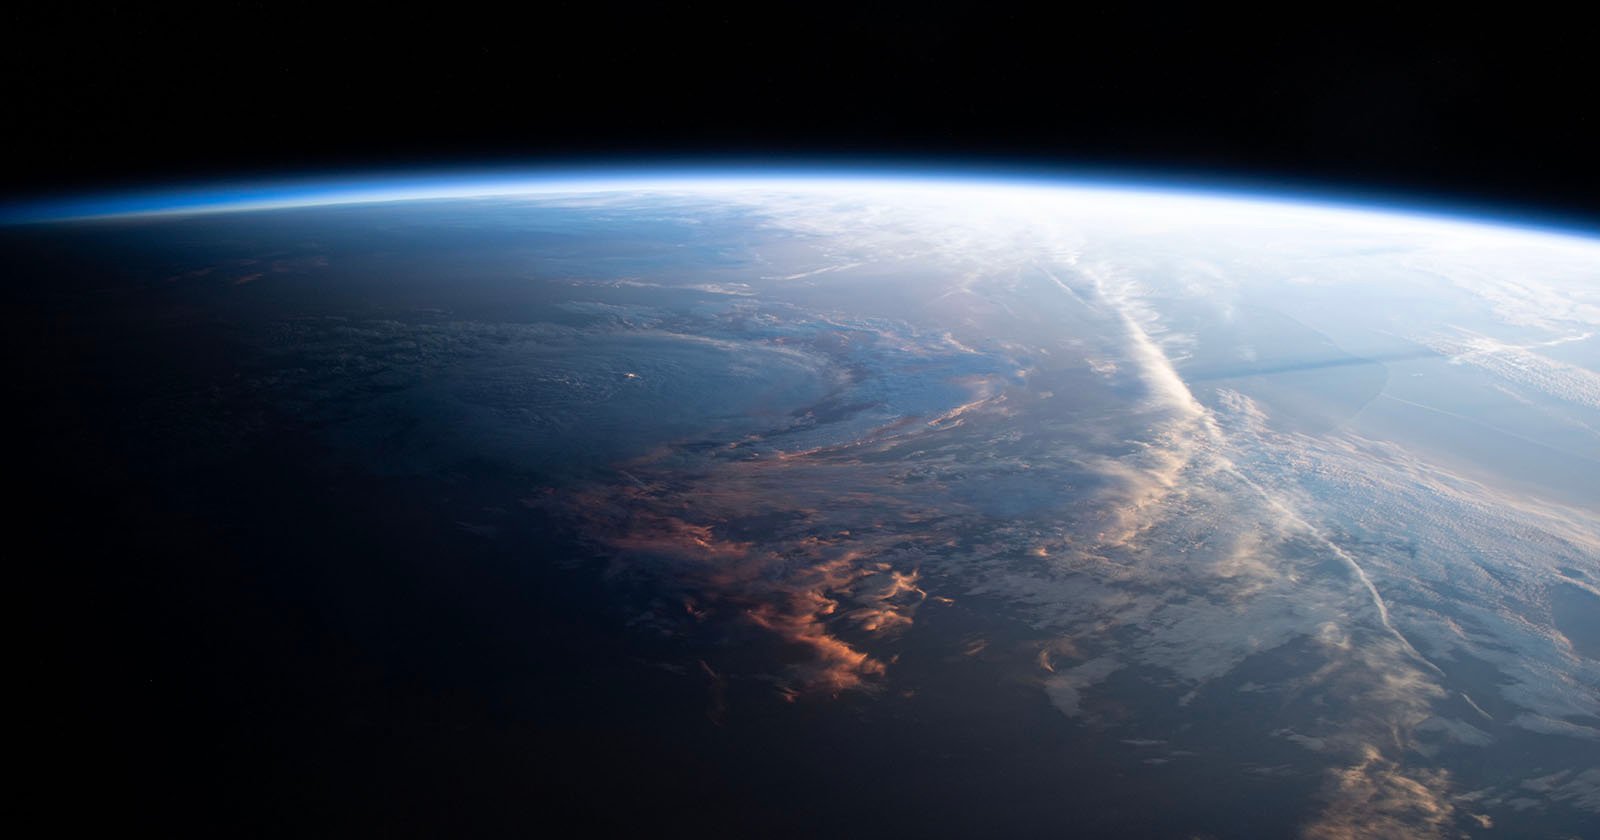 Earthbound Astronaut Shares Stunning Photos He Captured While in Orbit